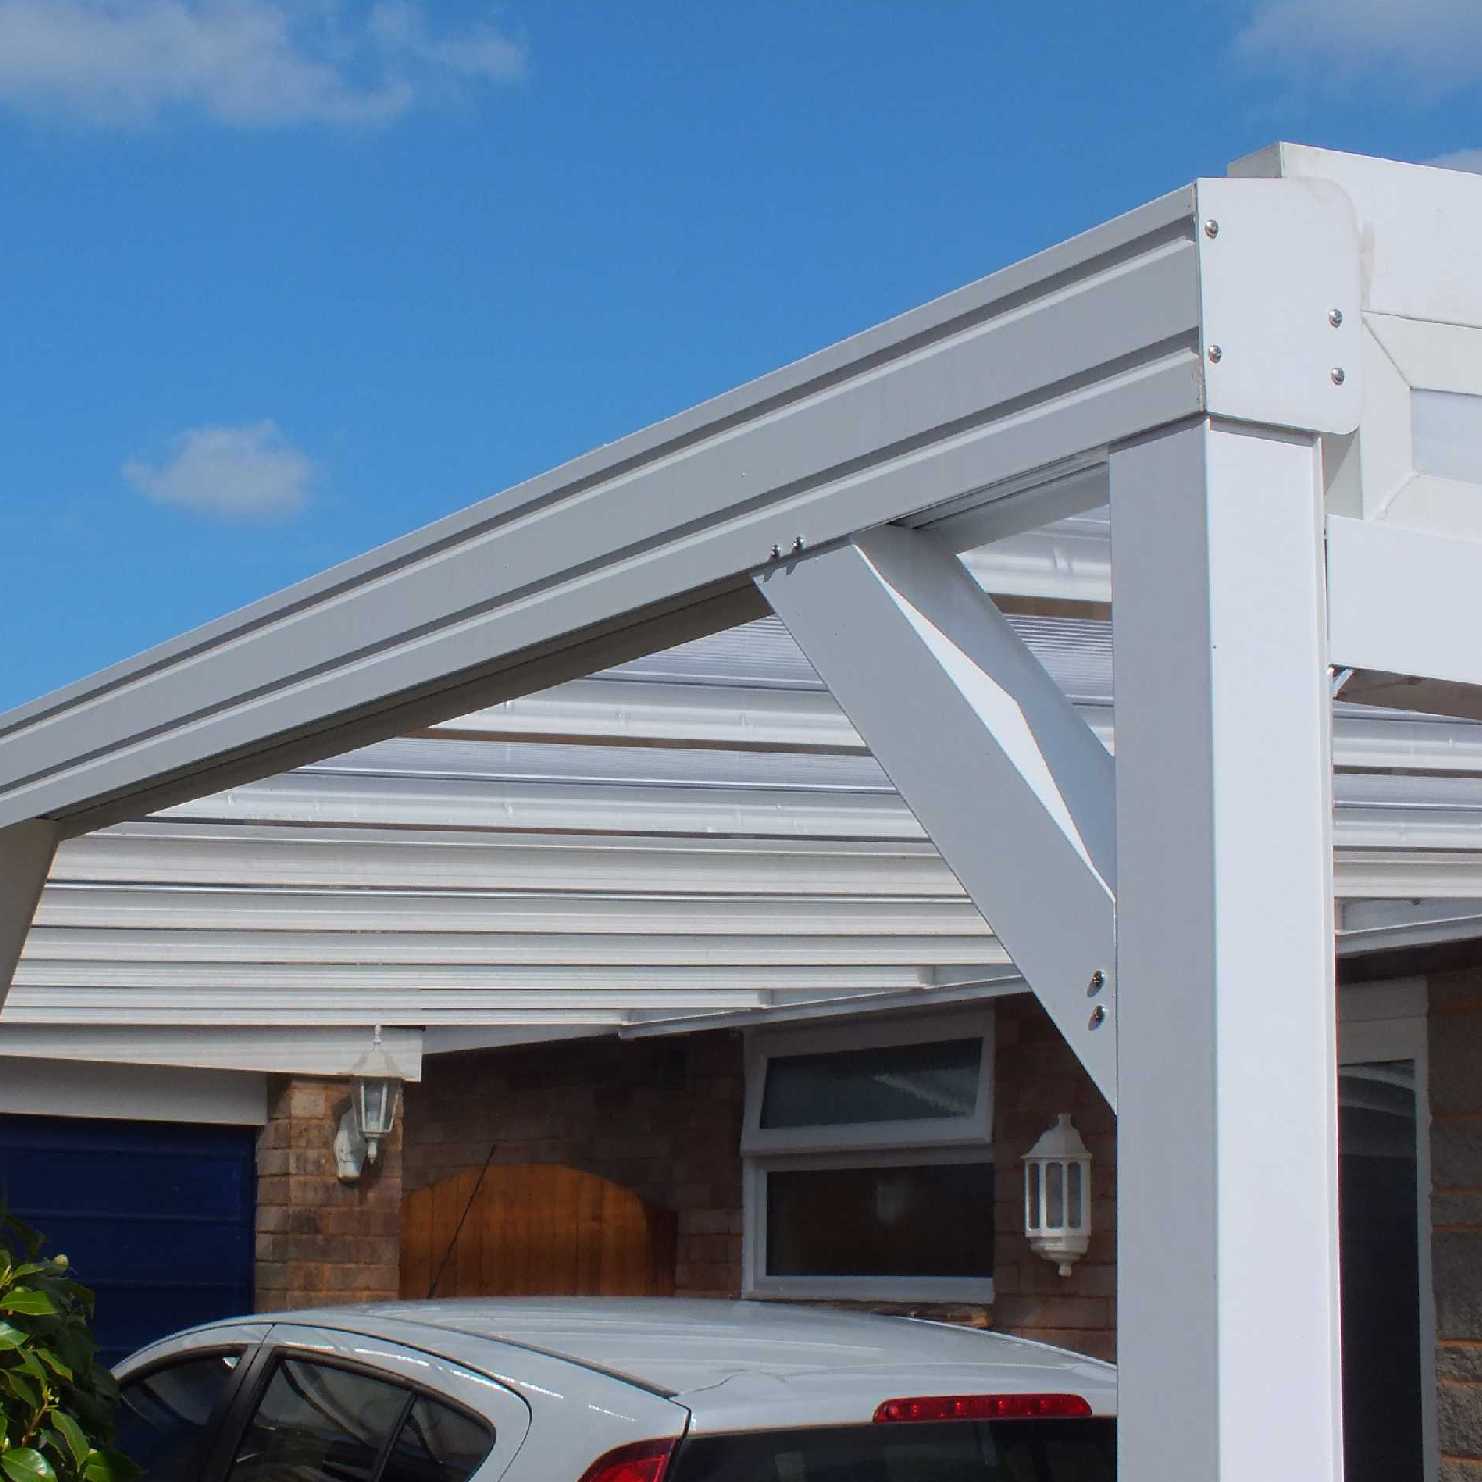 Great deals on Omega Smart Lean-To Canopy, White with 16mm Polycarbonate Glazing - 7.0m (W) x 3.5m (P), (4) Supporting Posts